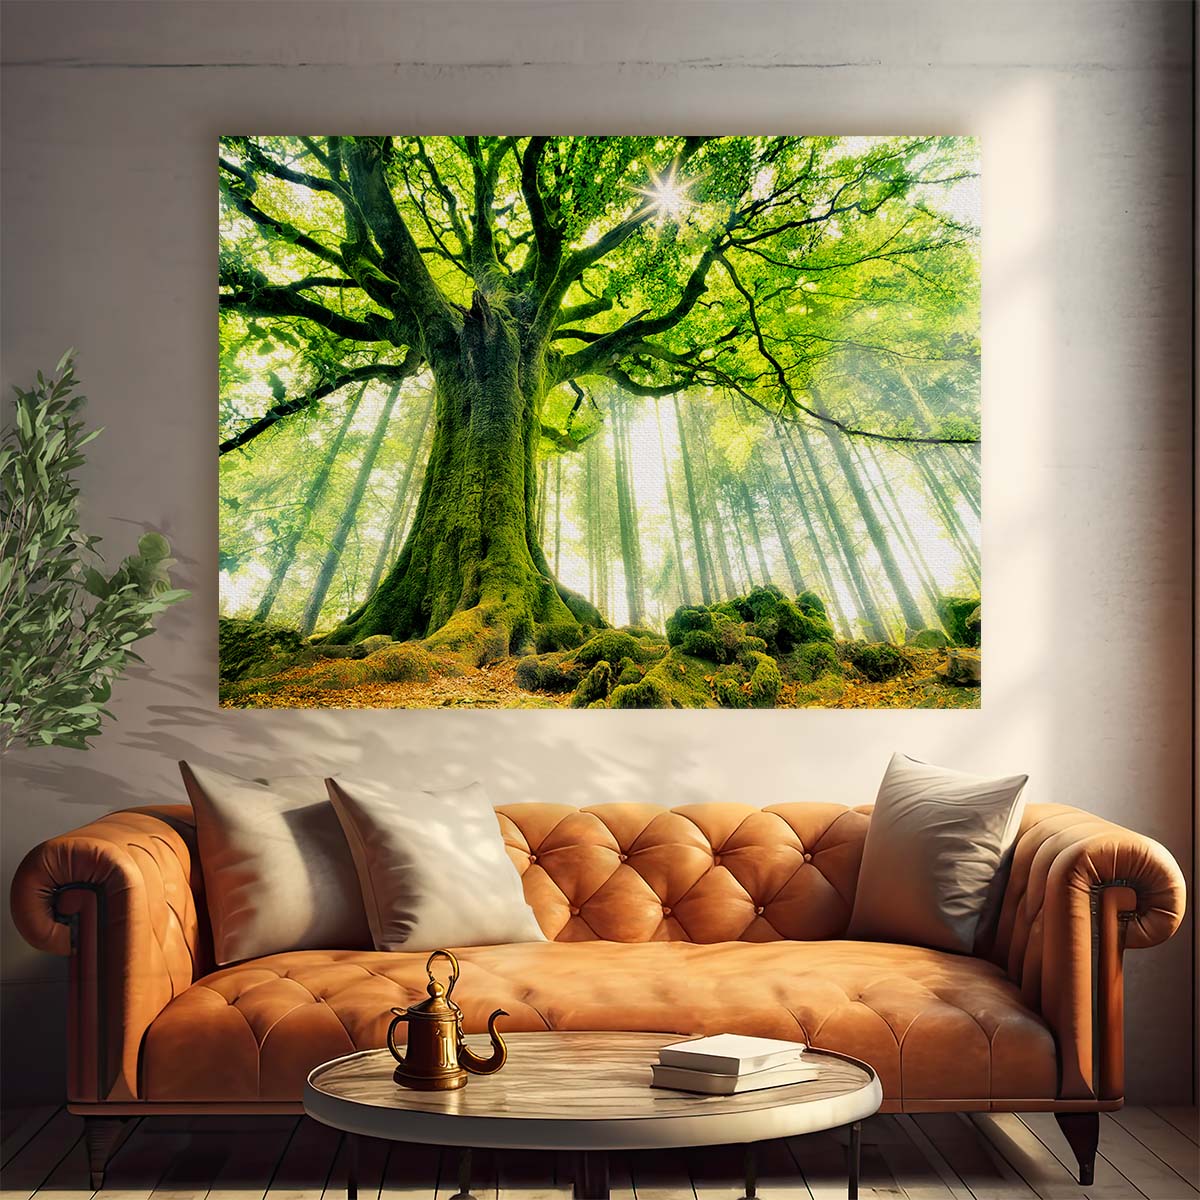 Surreal Ponthus' Beech Tree Magical Forest Landscape Photo Wall Art